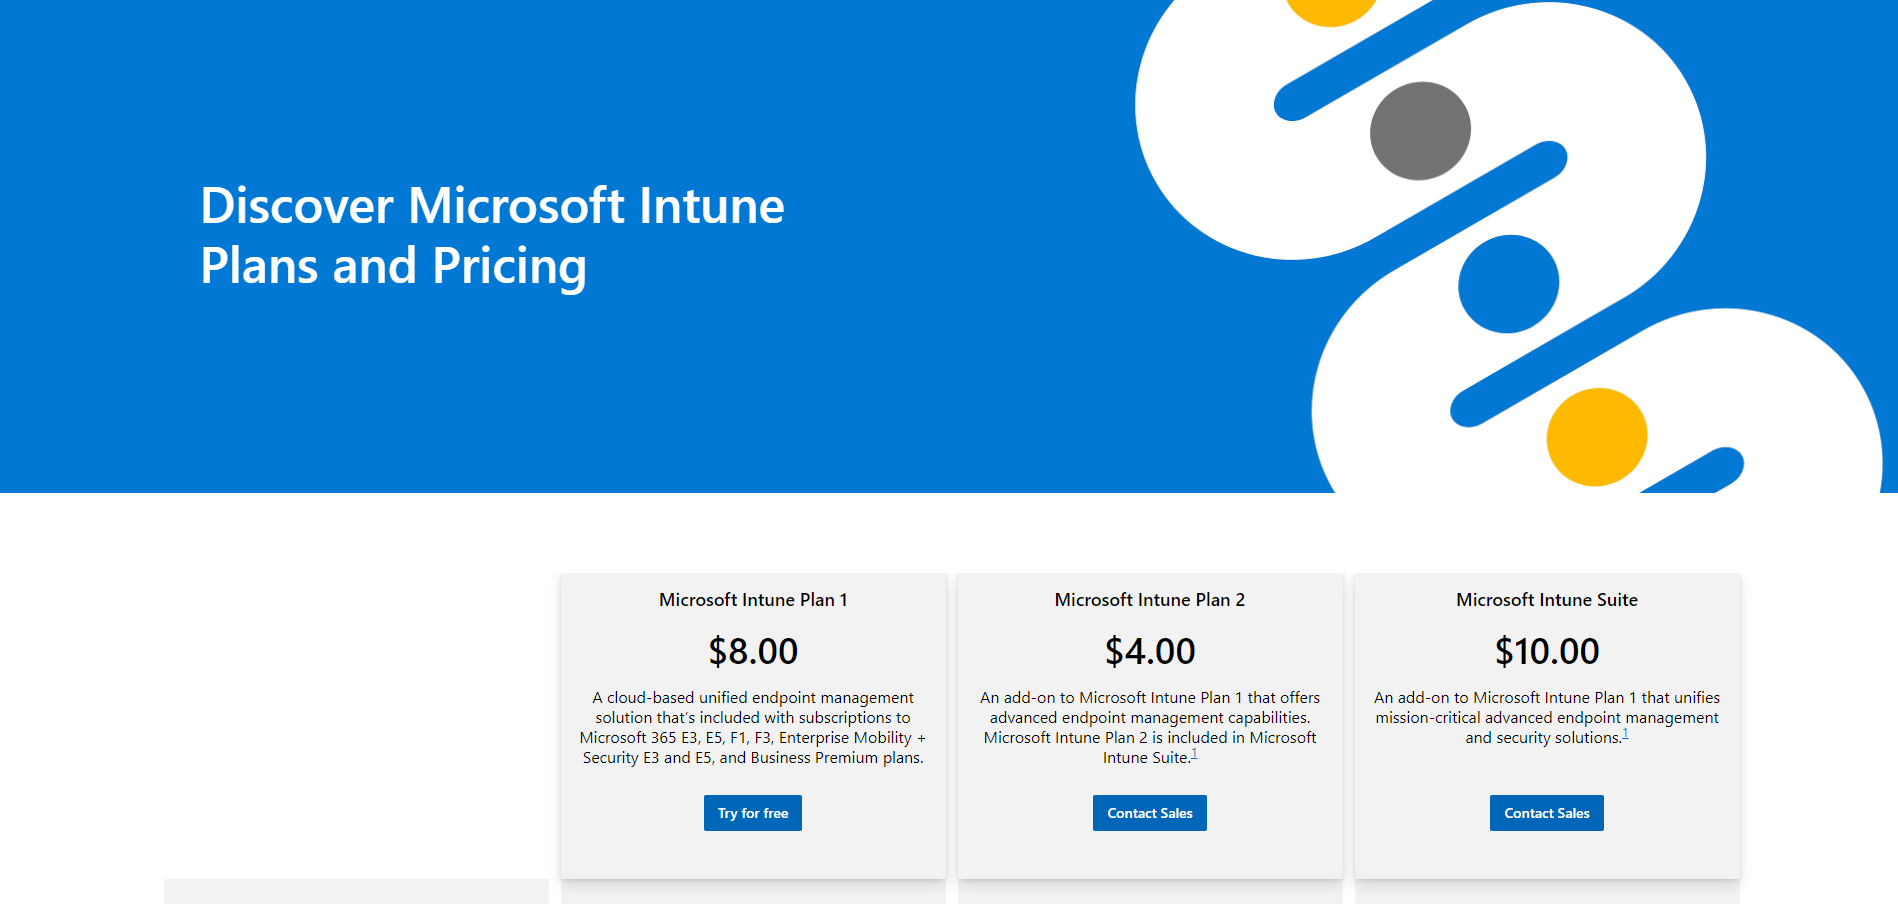 Learn about Microsoft Intune pricing